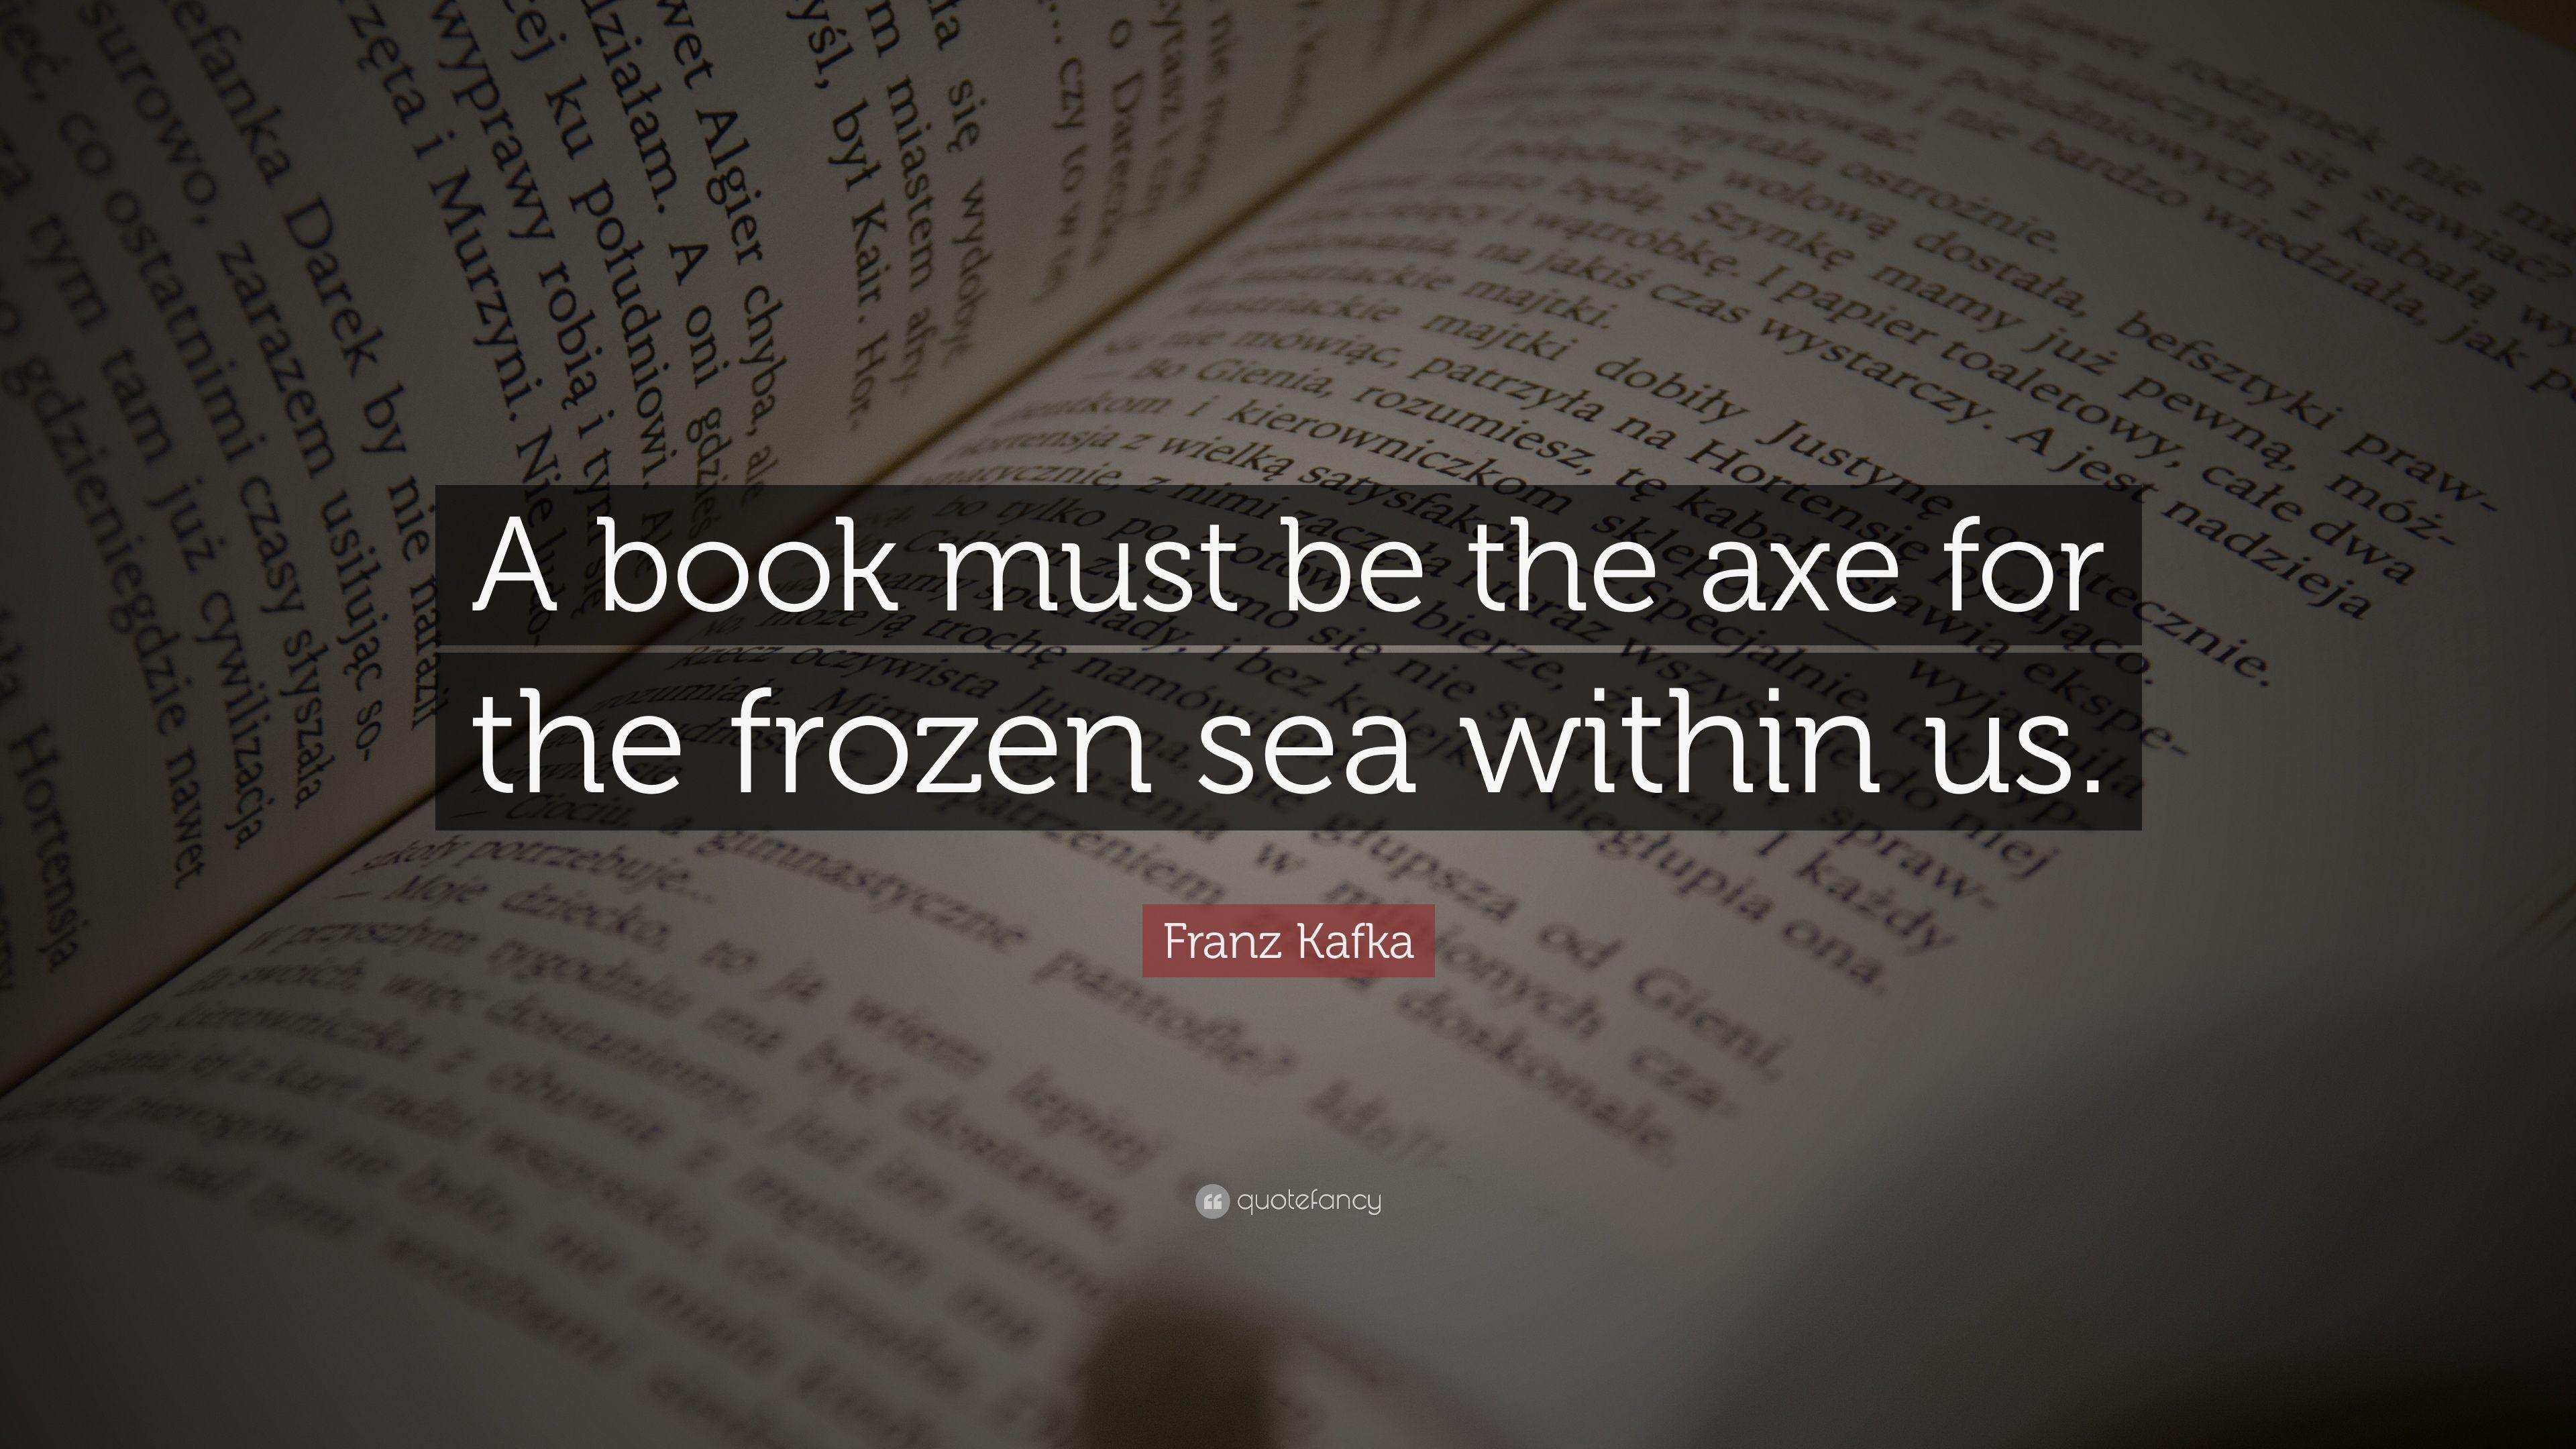 Franz Kafka Quote: “A book must be the axe for the frozen sea within